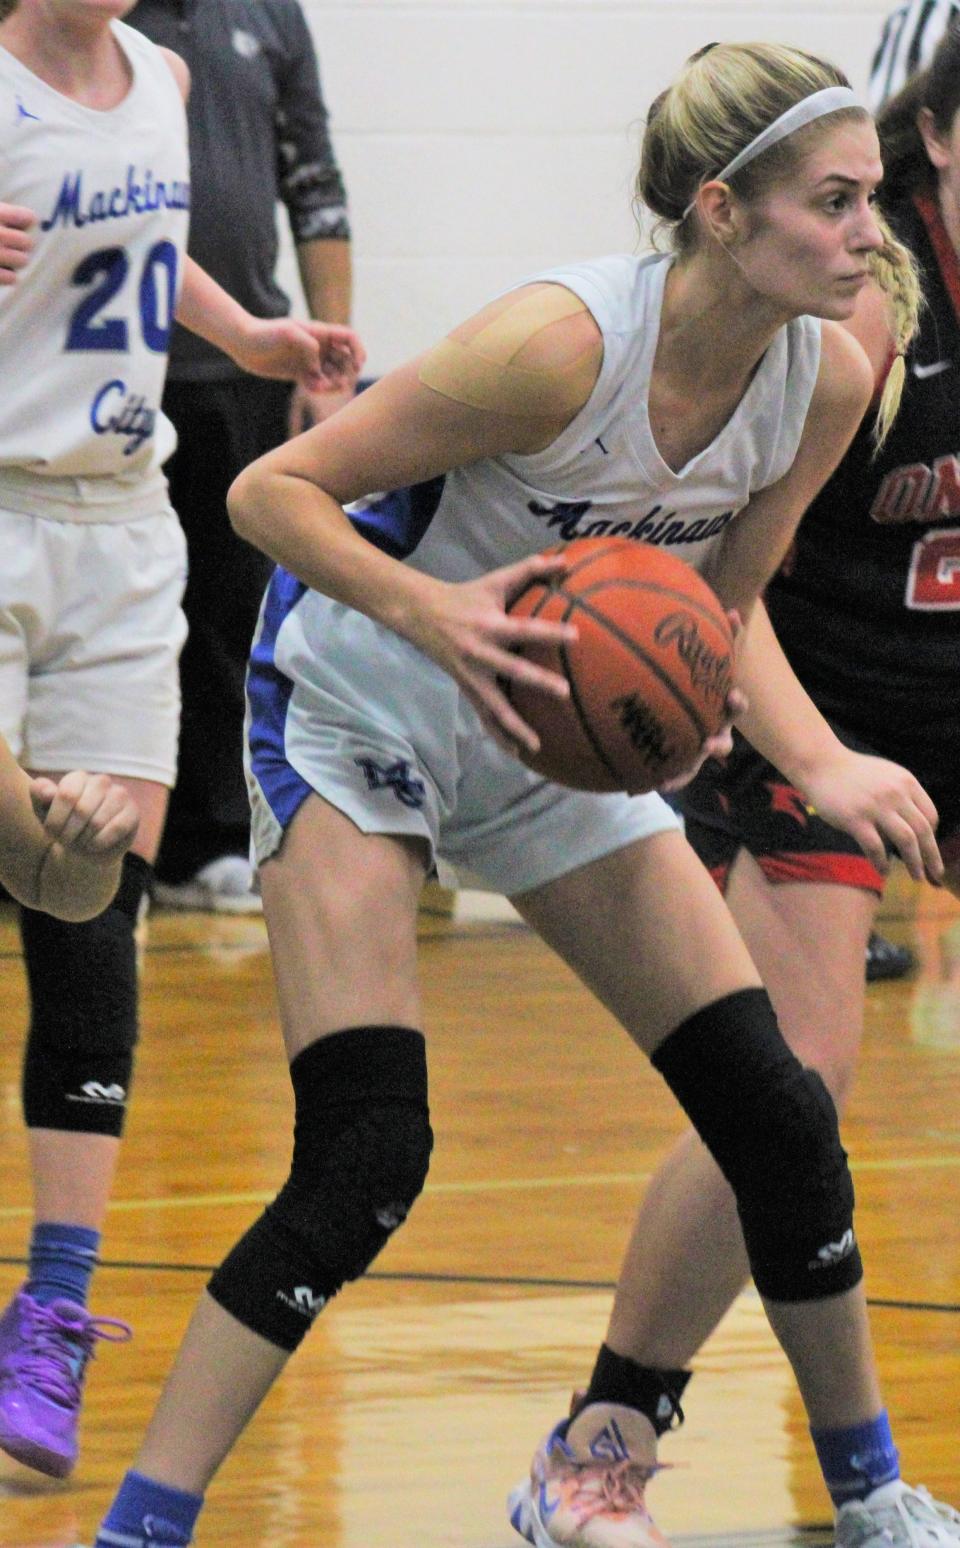 Madison Smith turned in another big night for the Comets Monday, helping Mackinaw City pull in a fifth consecutive undefeated league title.